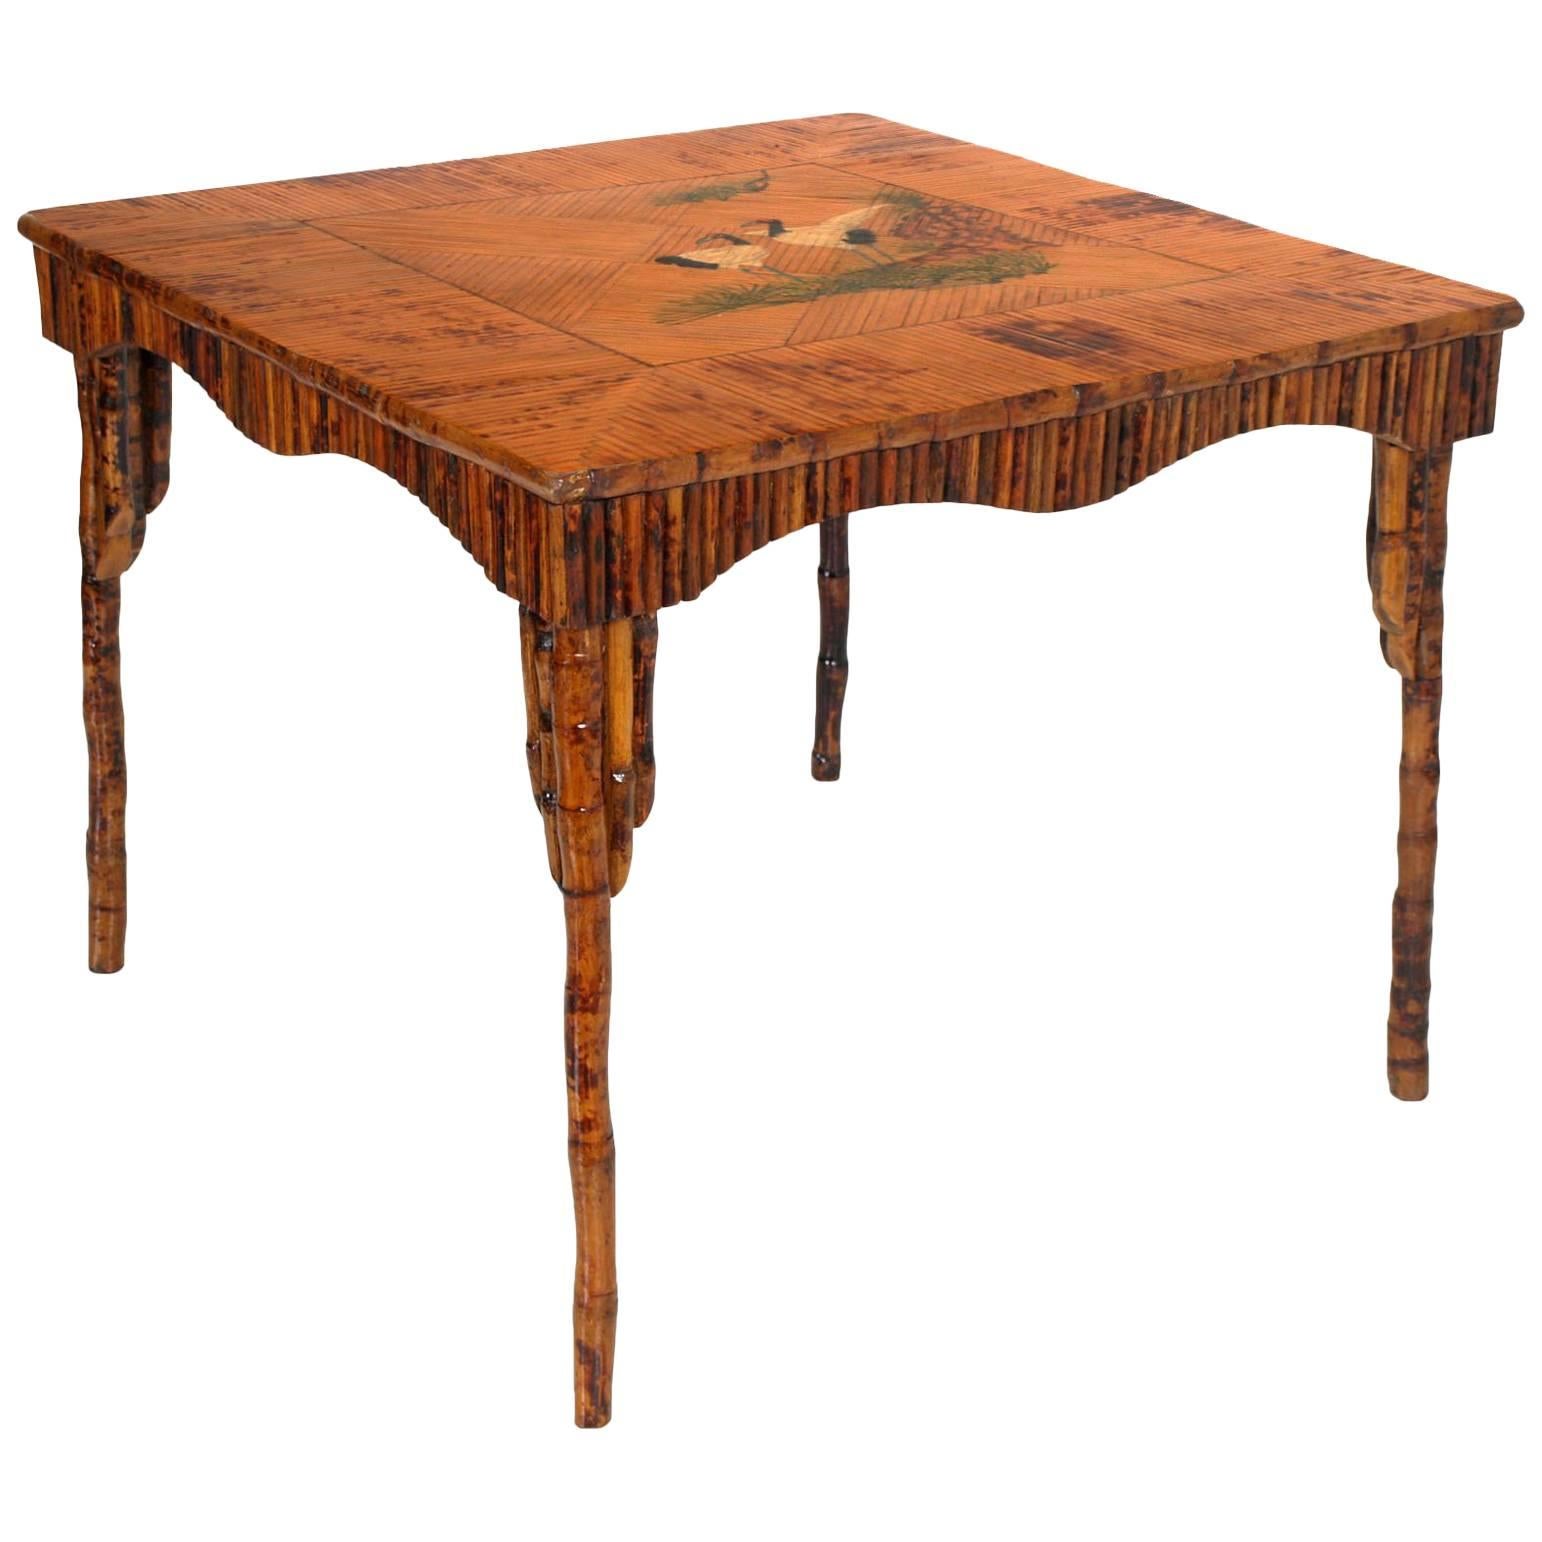 Precious Art Deco Chinoiserie Table from the 1920s, in beech wood hand-carved 